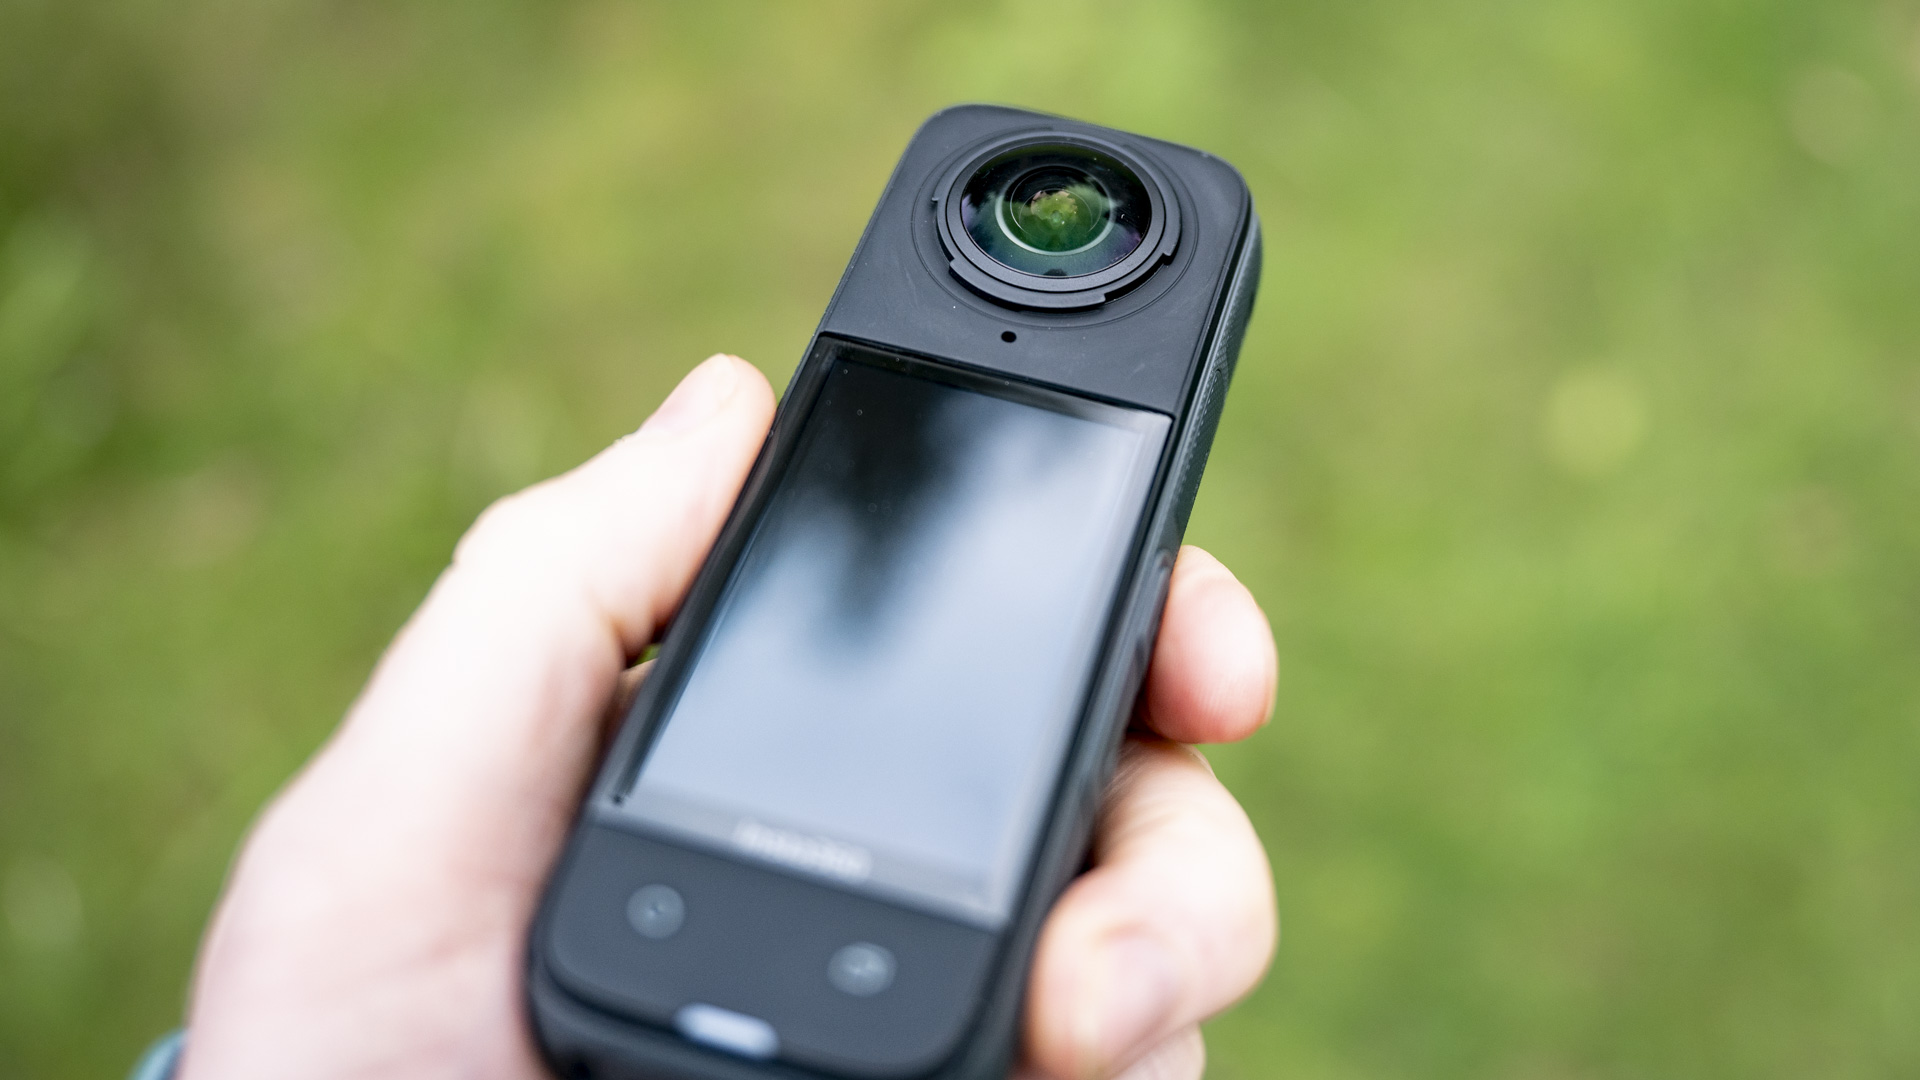 Insta360 X4 360 degree camera without lens protector